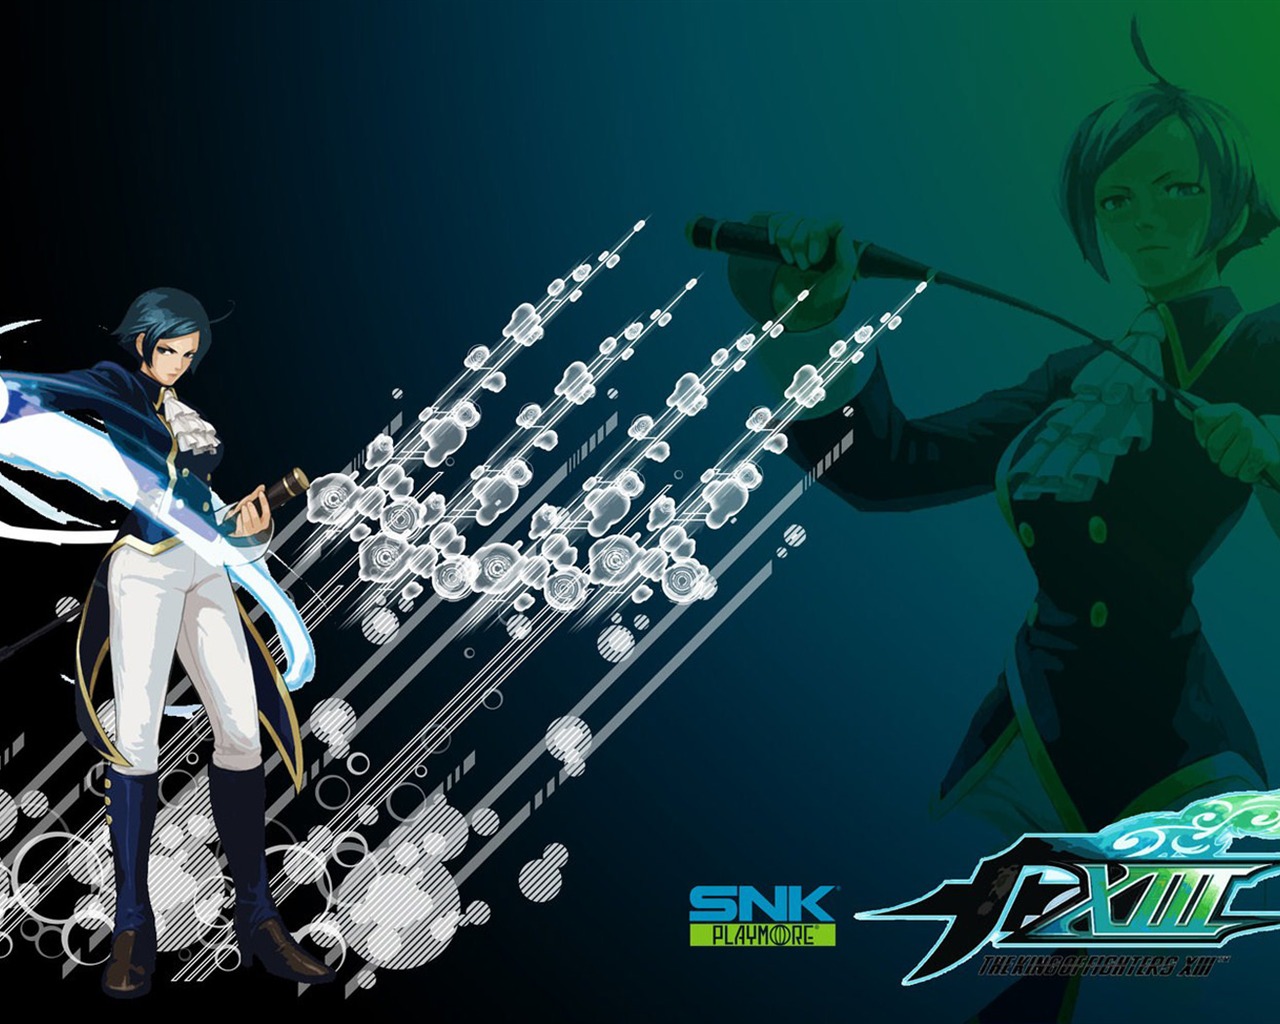 The King of Fighters XIII wallpapers #11 - 1280x1024